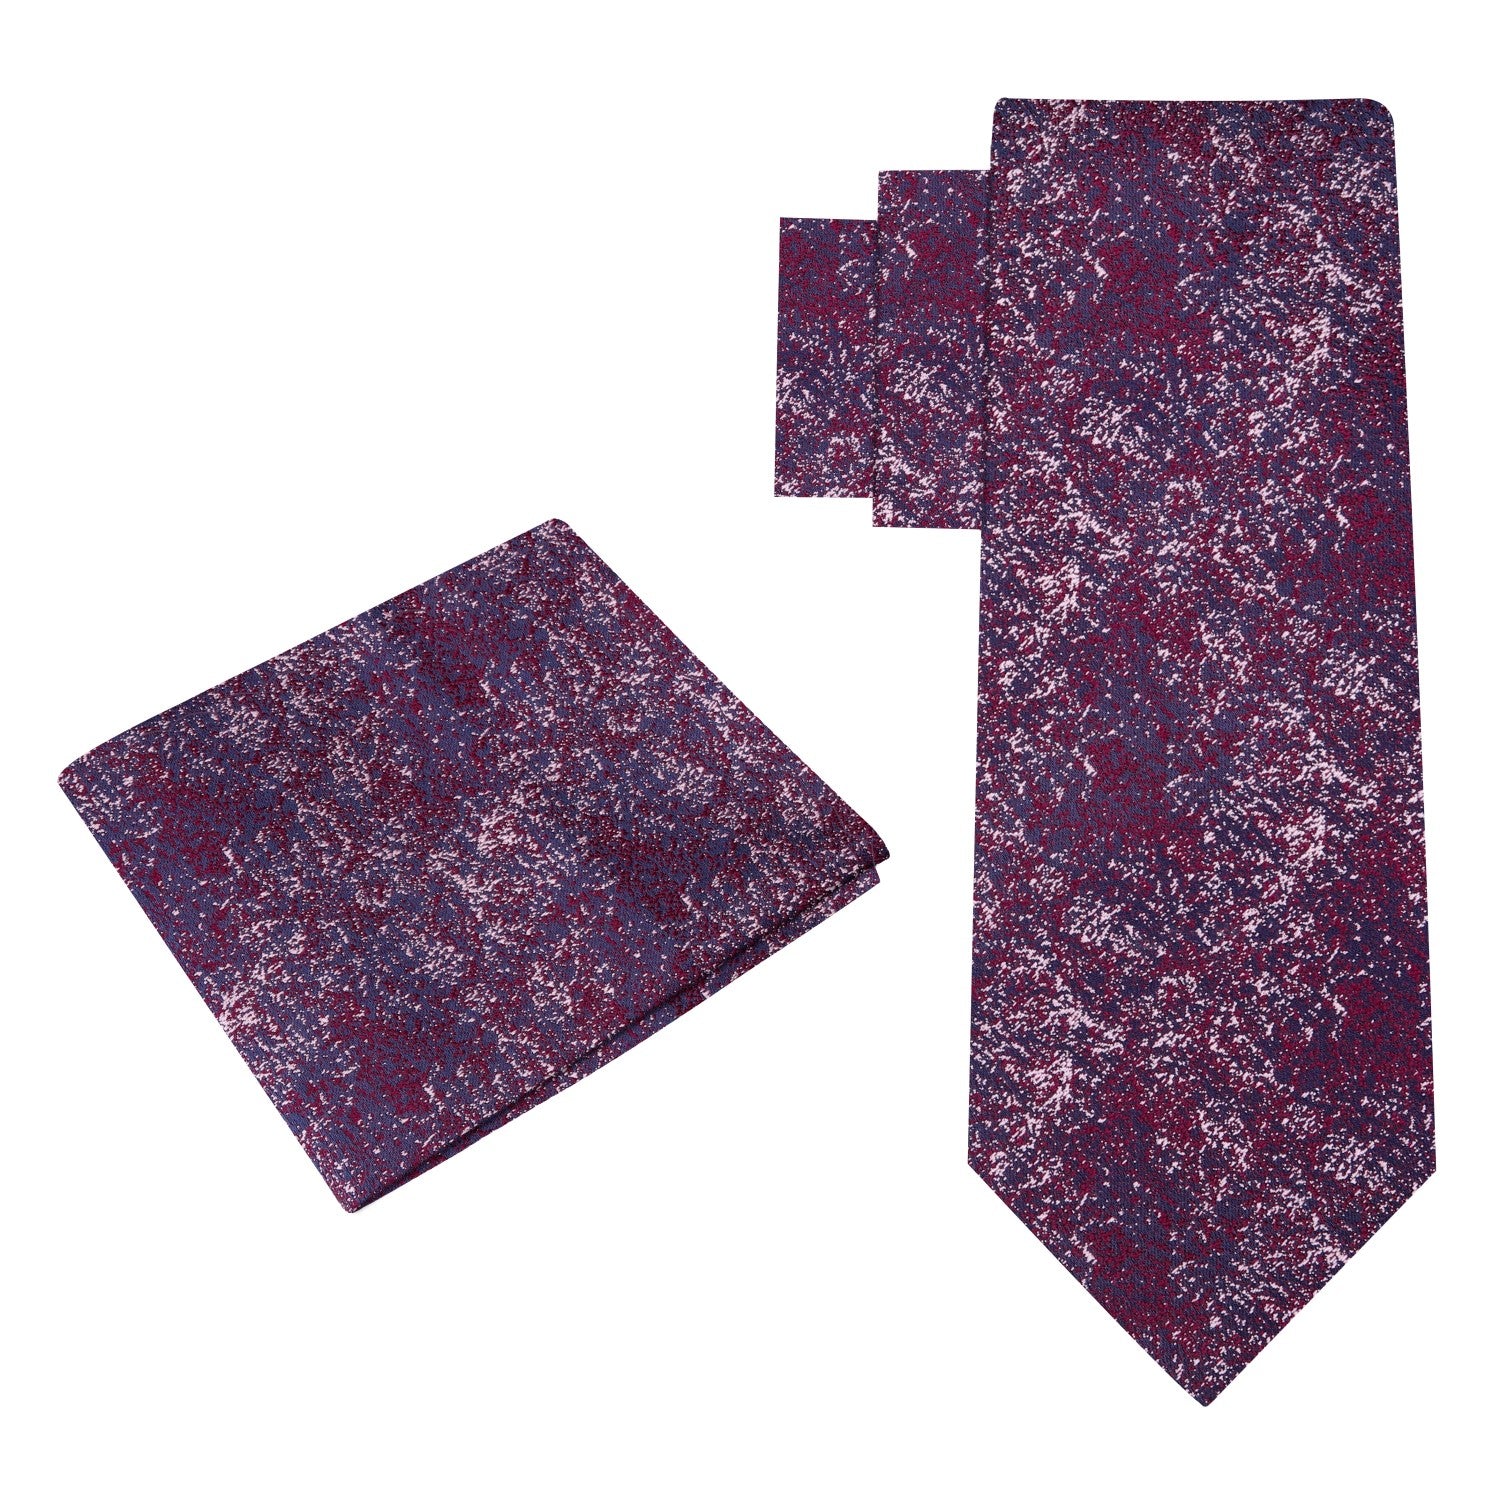 Alt View: A Fury Red, Peach Sand, Midnight Blue Color Textured Pattern Silk Tie, Pocket Square